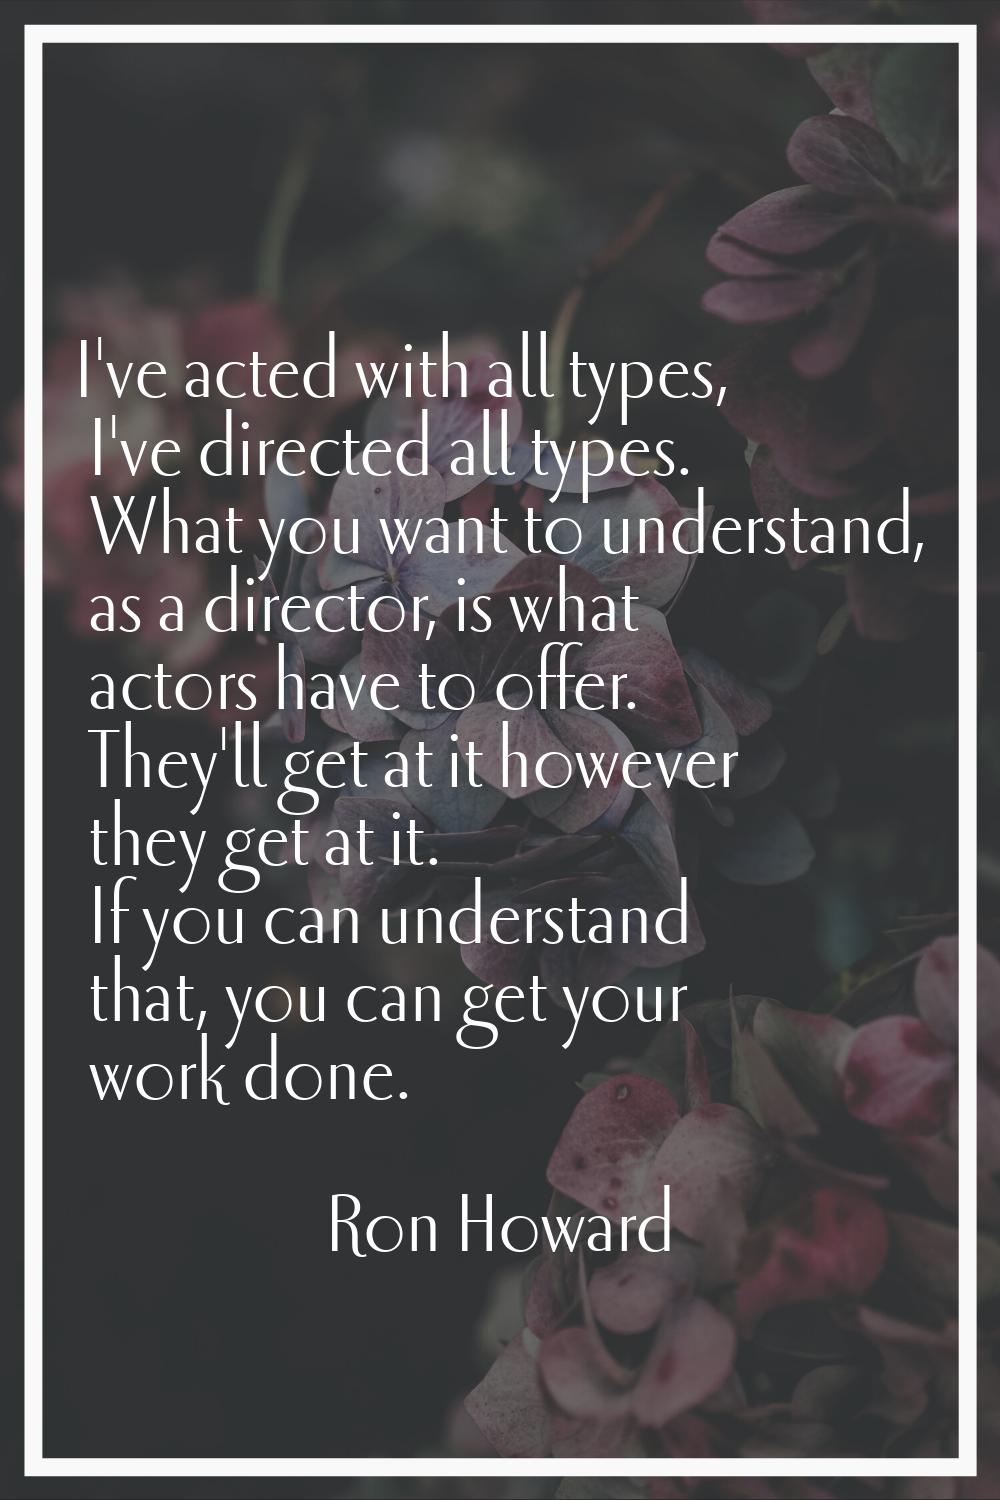 I've acted with all types, I've directed all types. What you want to understand, as a director, is 